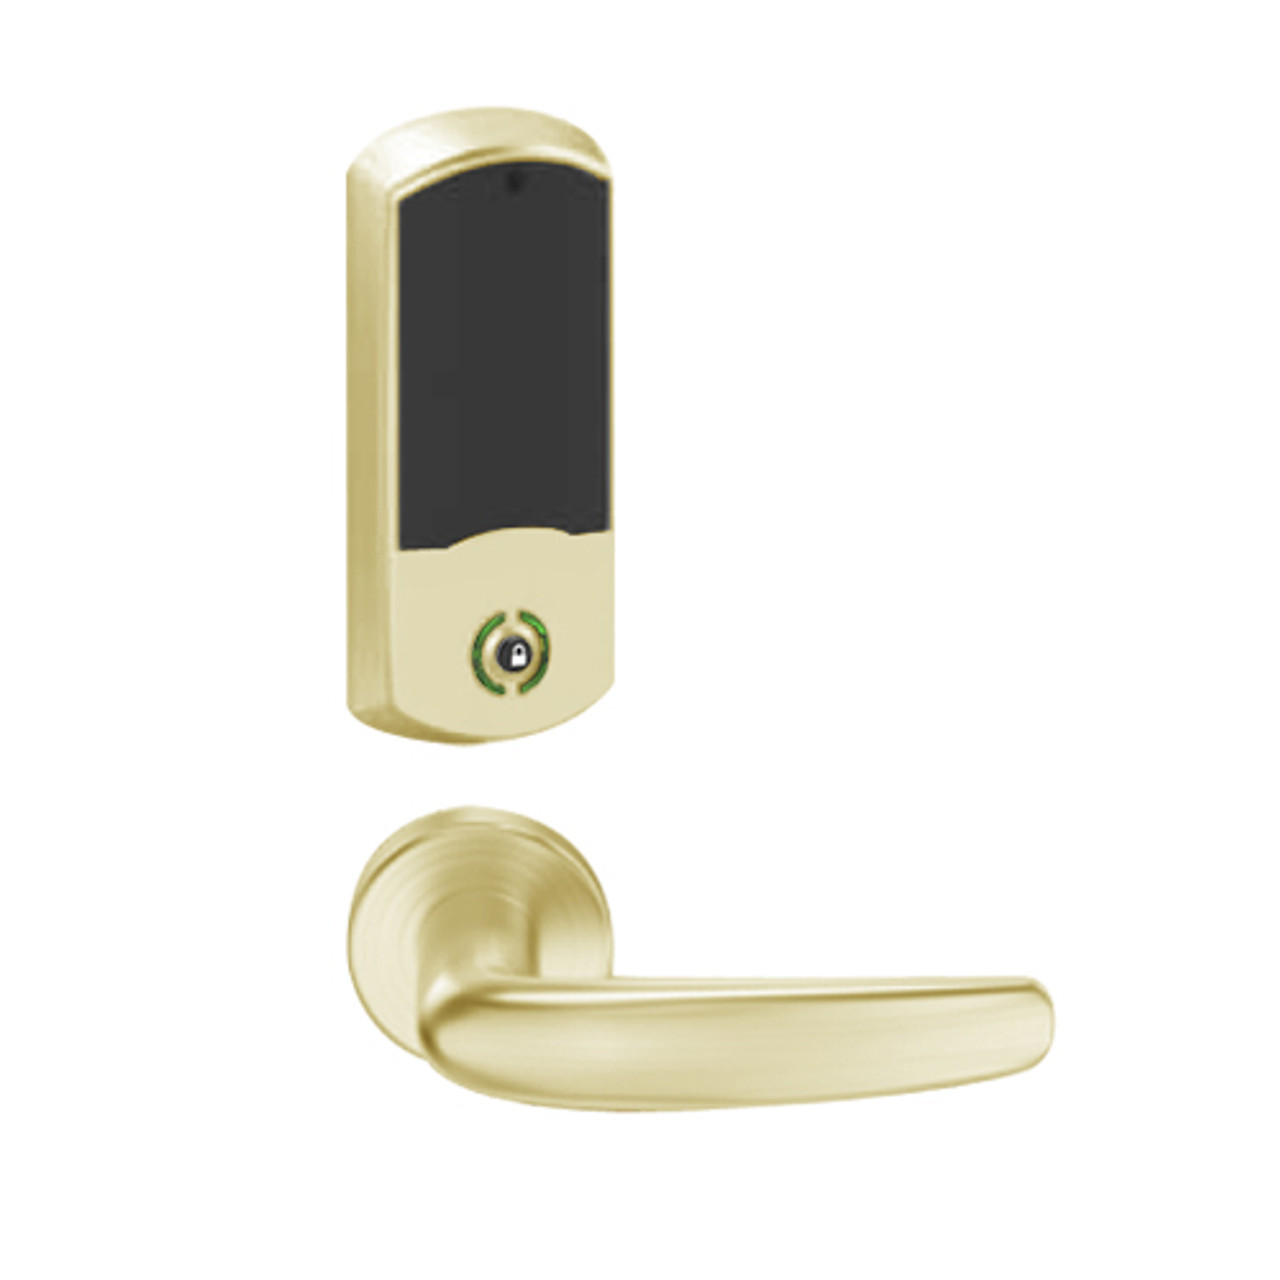 LEMB-GRW-BD-07-606-00C Schlage Privacy/Office Wireless Greenwich Mortise Lock with Push Button & LED Indicator and Athens Lever Prepped for SFIC in Satin Brass